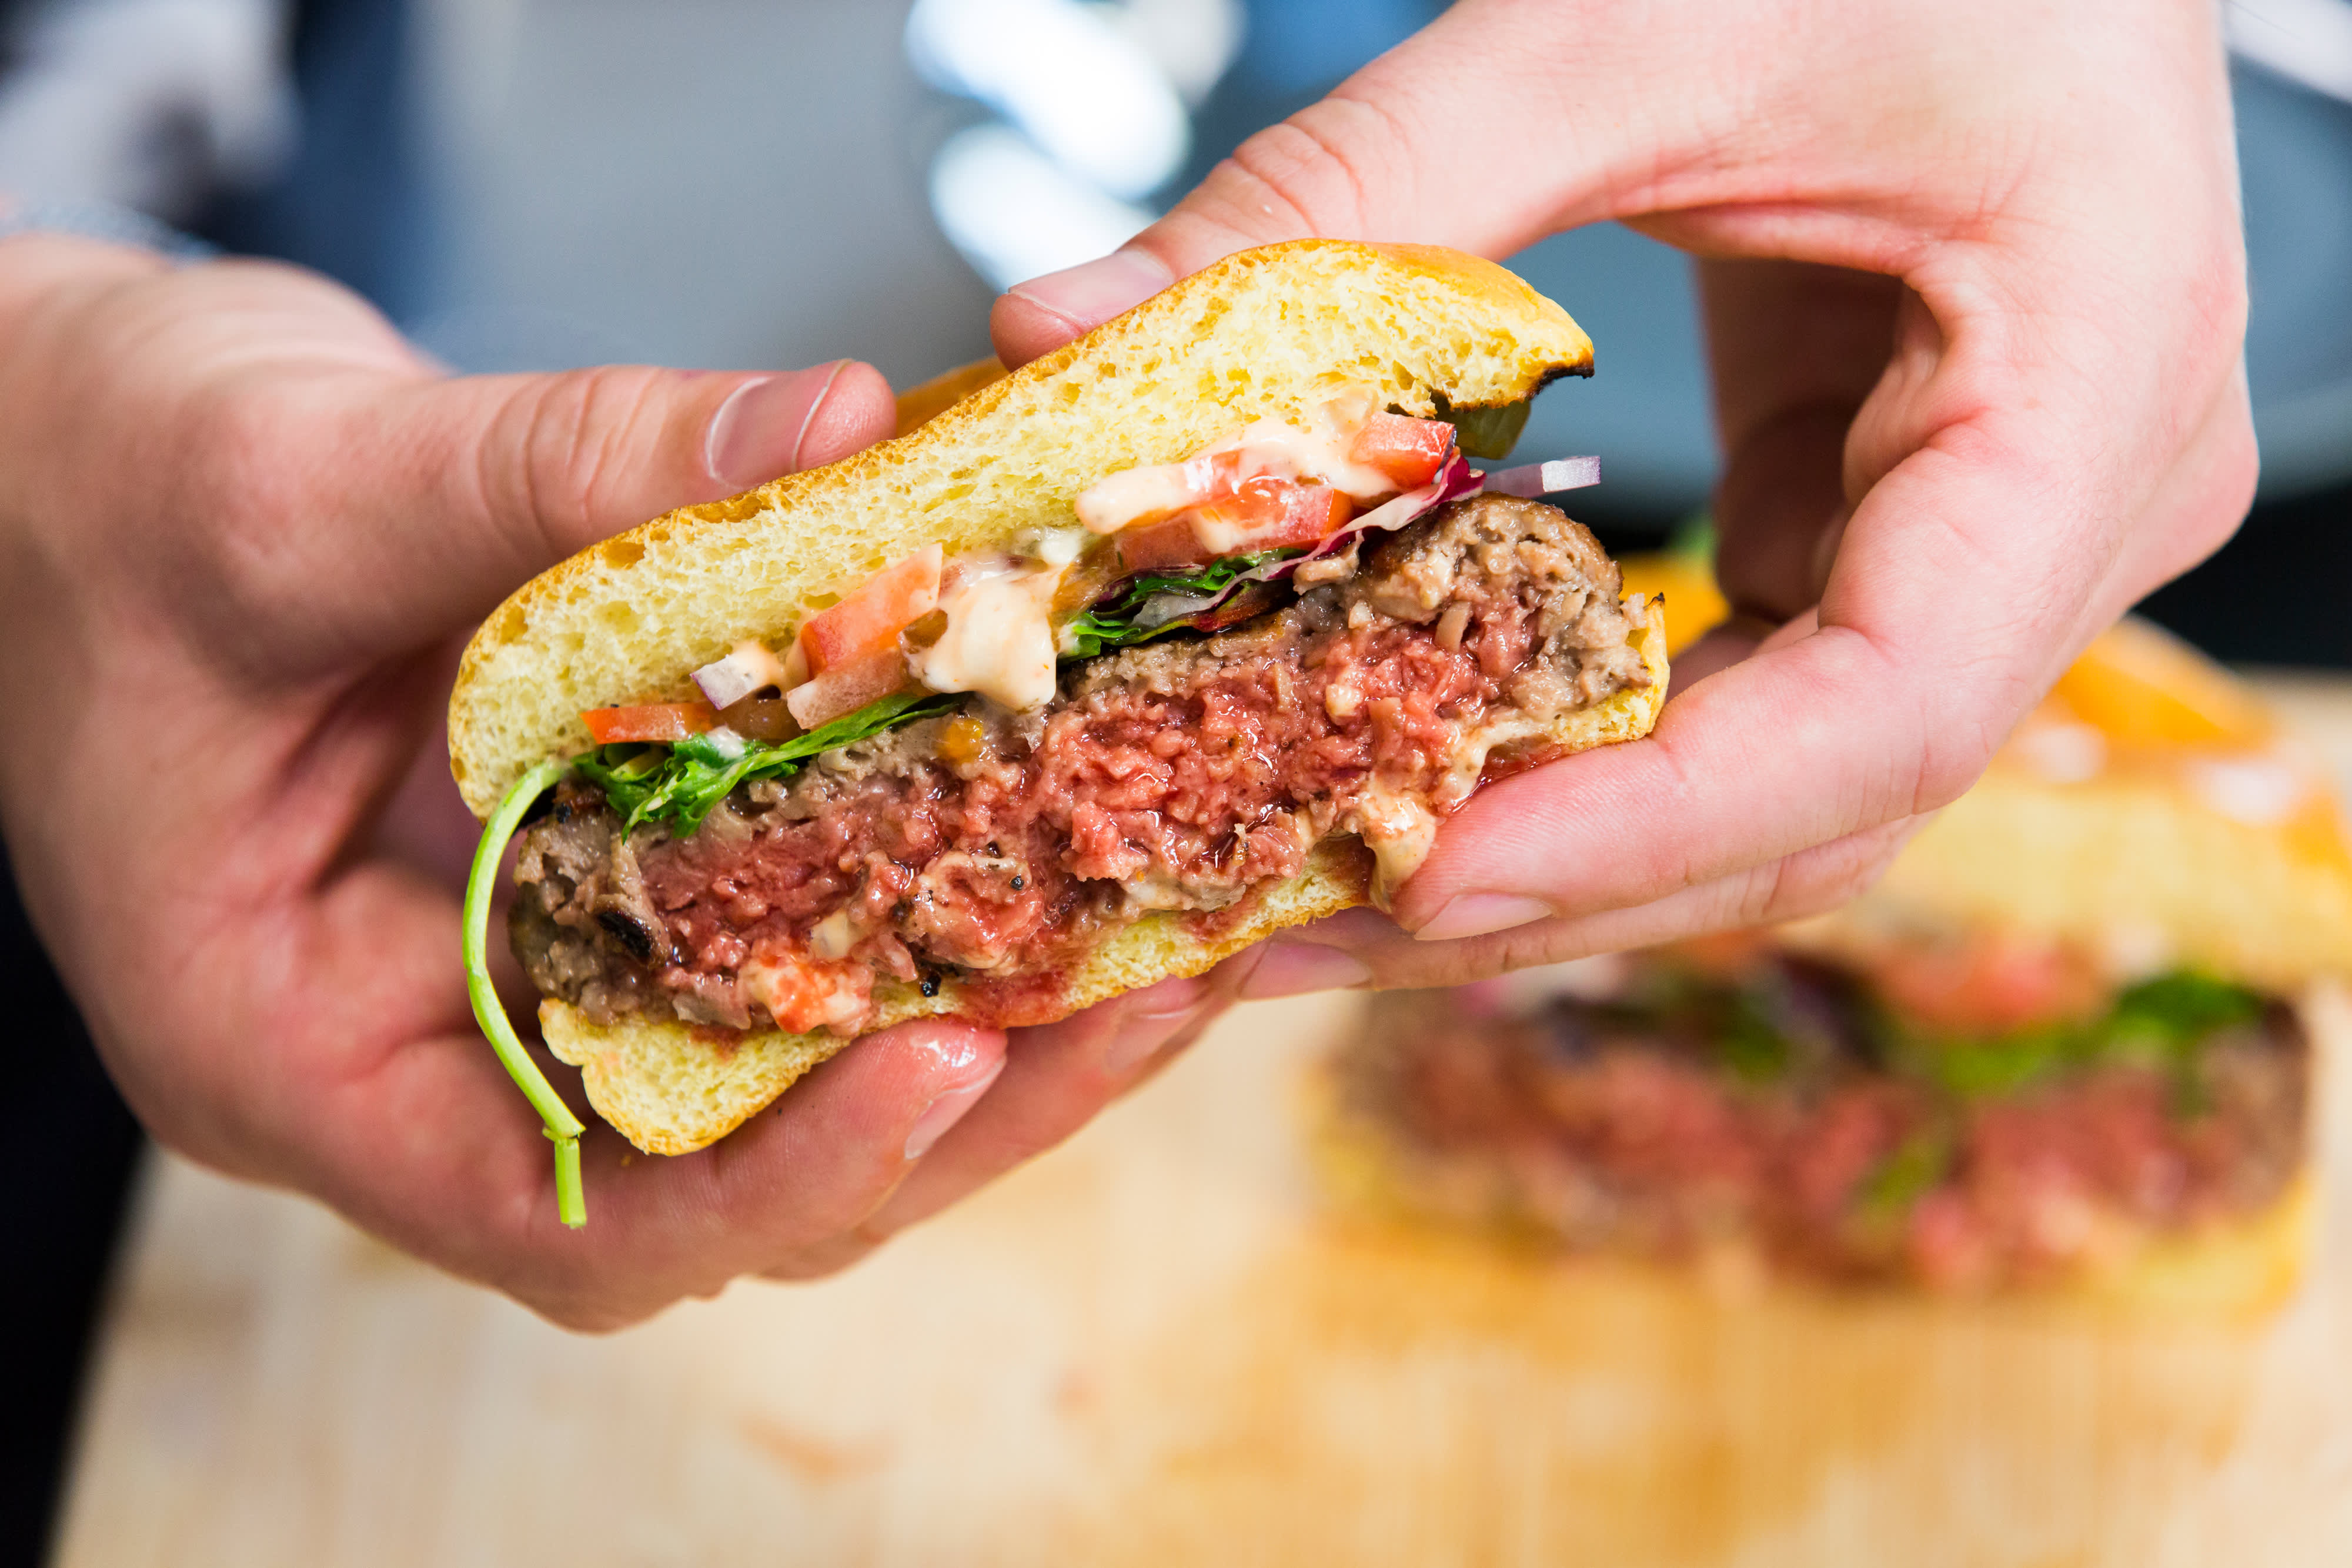 Impossible Foods reduces food retailer prices by 15% on average